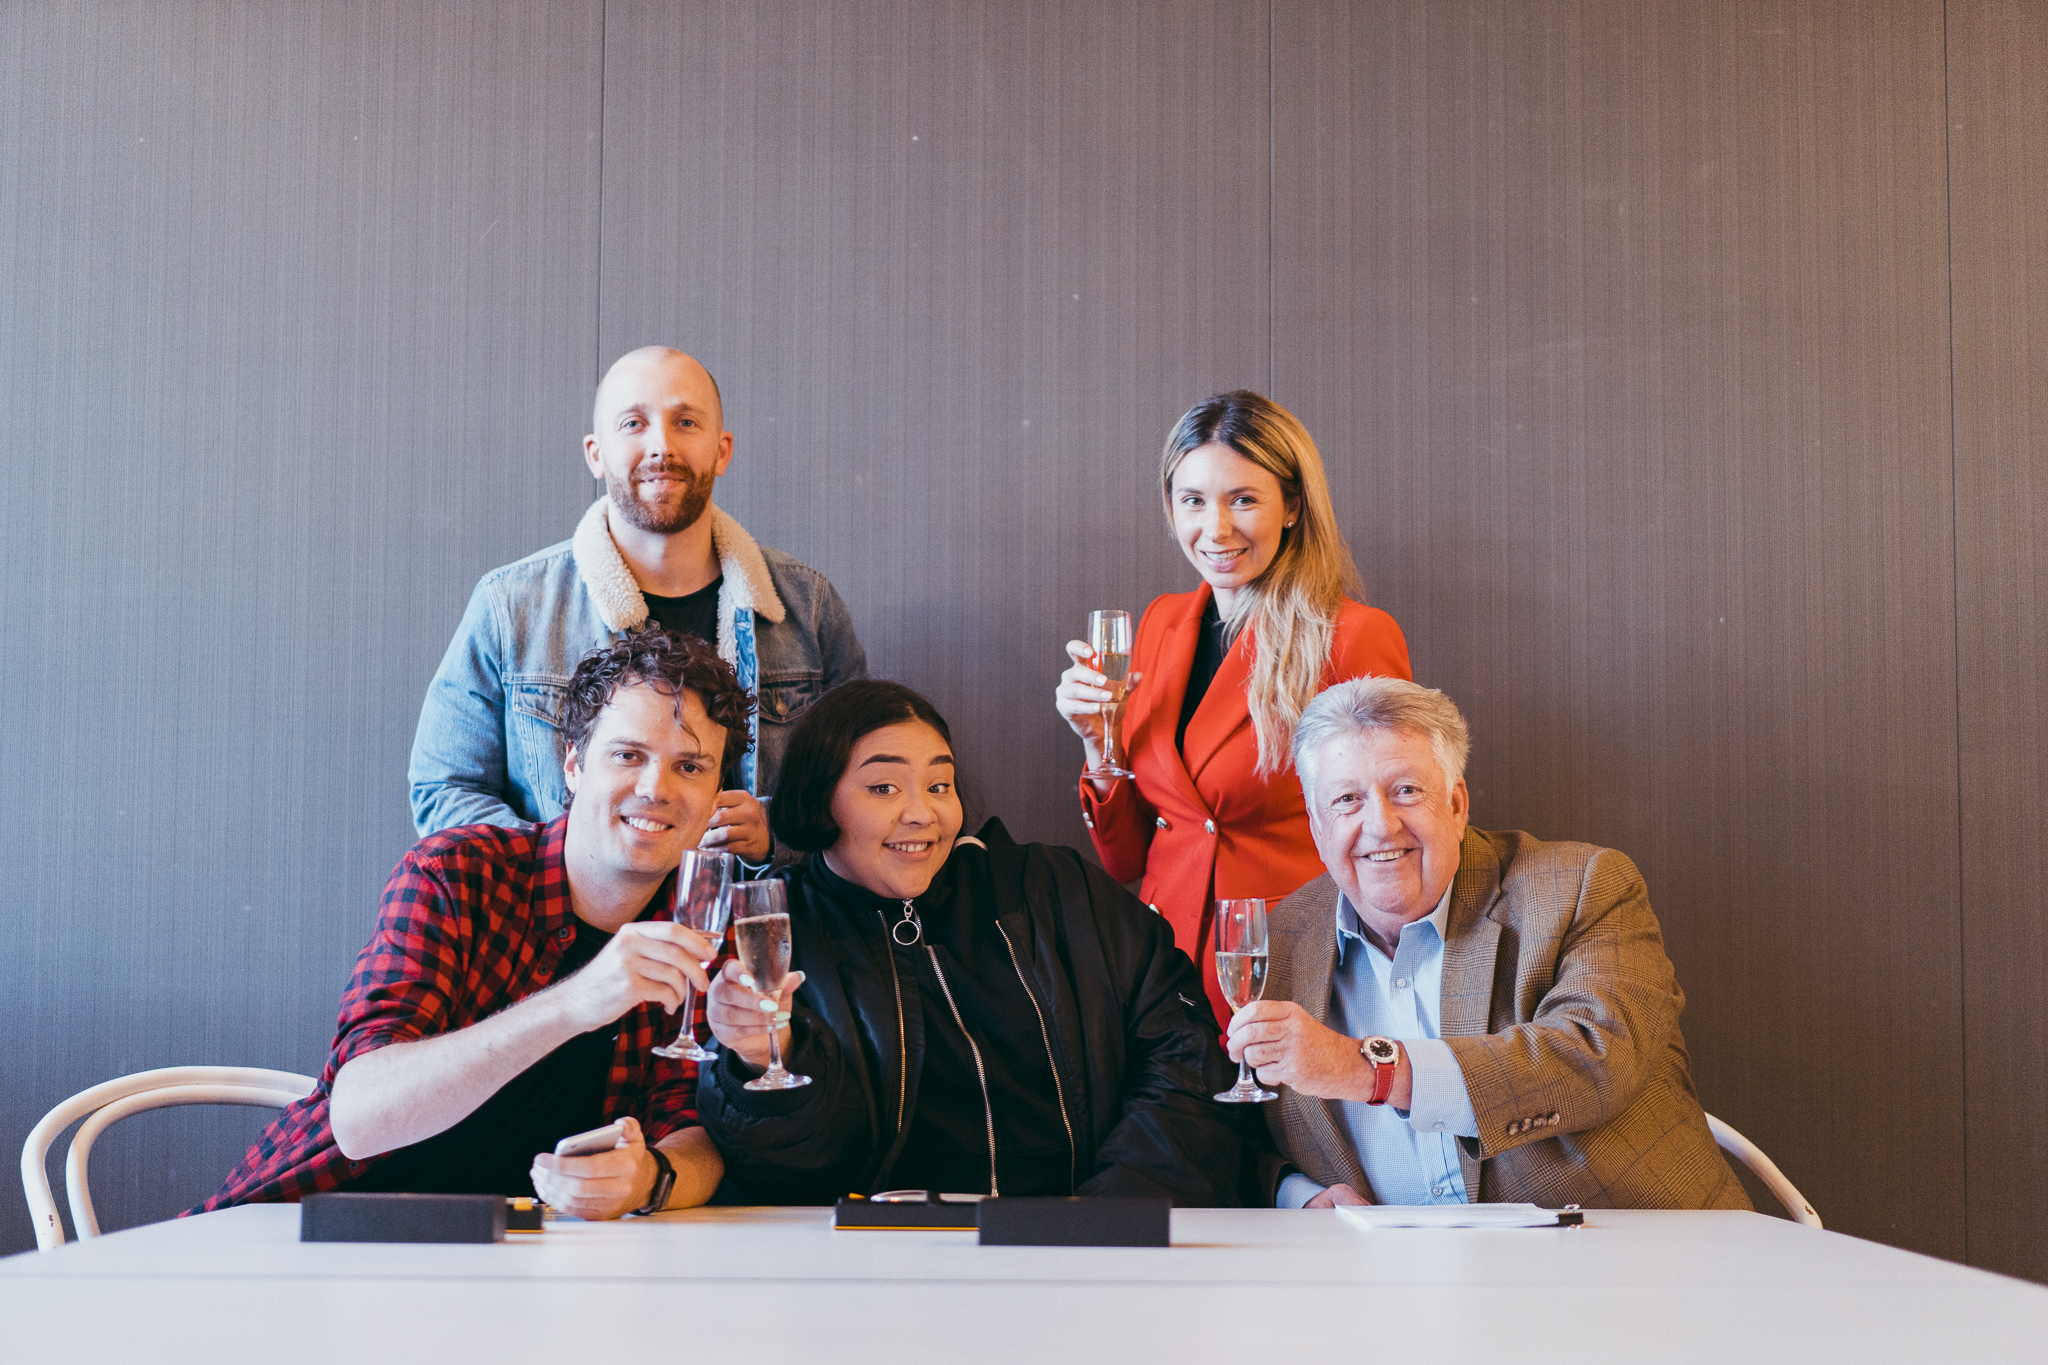 Sony announce new joint venture label ‘New Tribe Music’, Kira Puru first signing